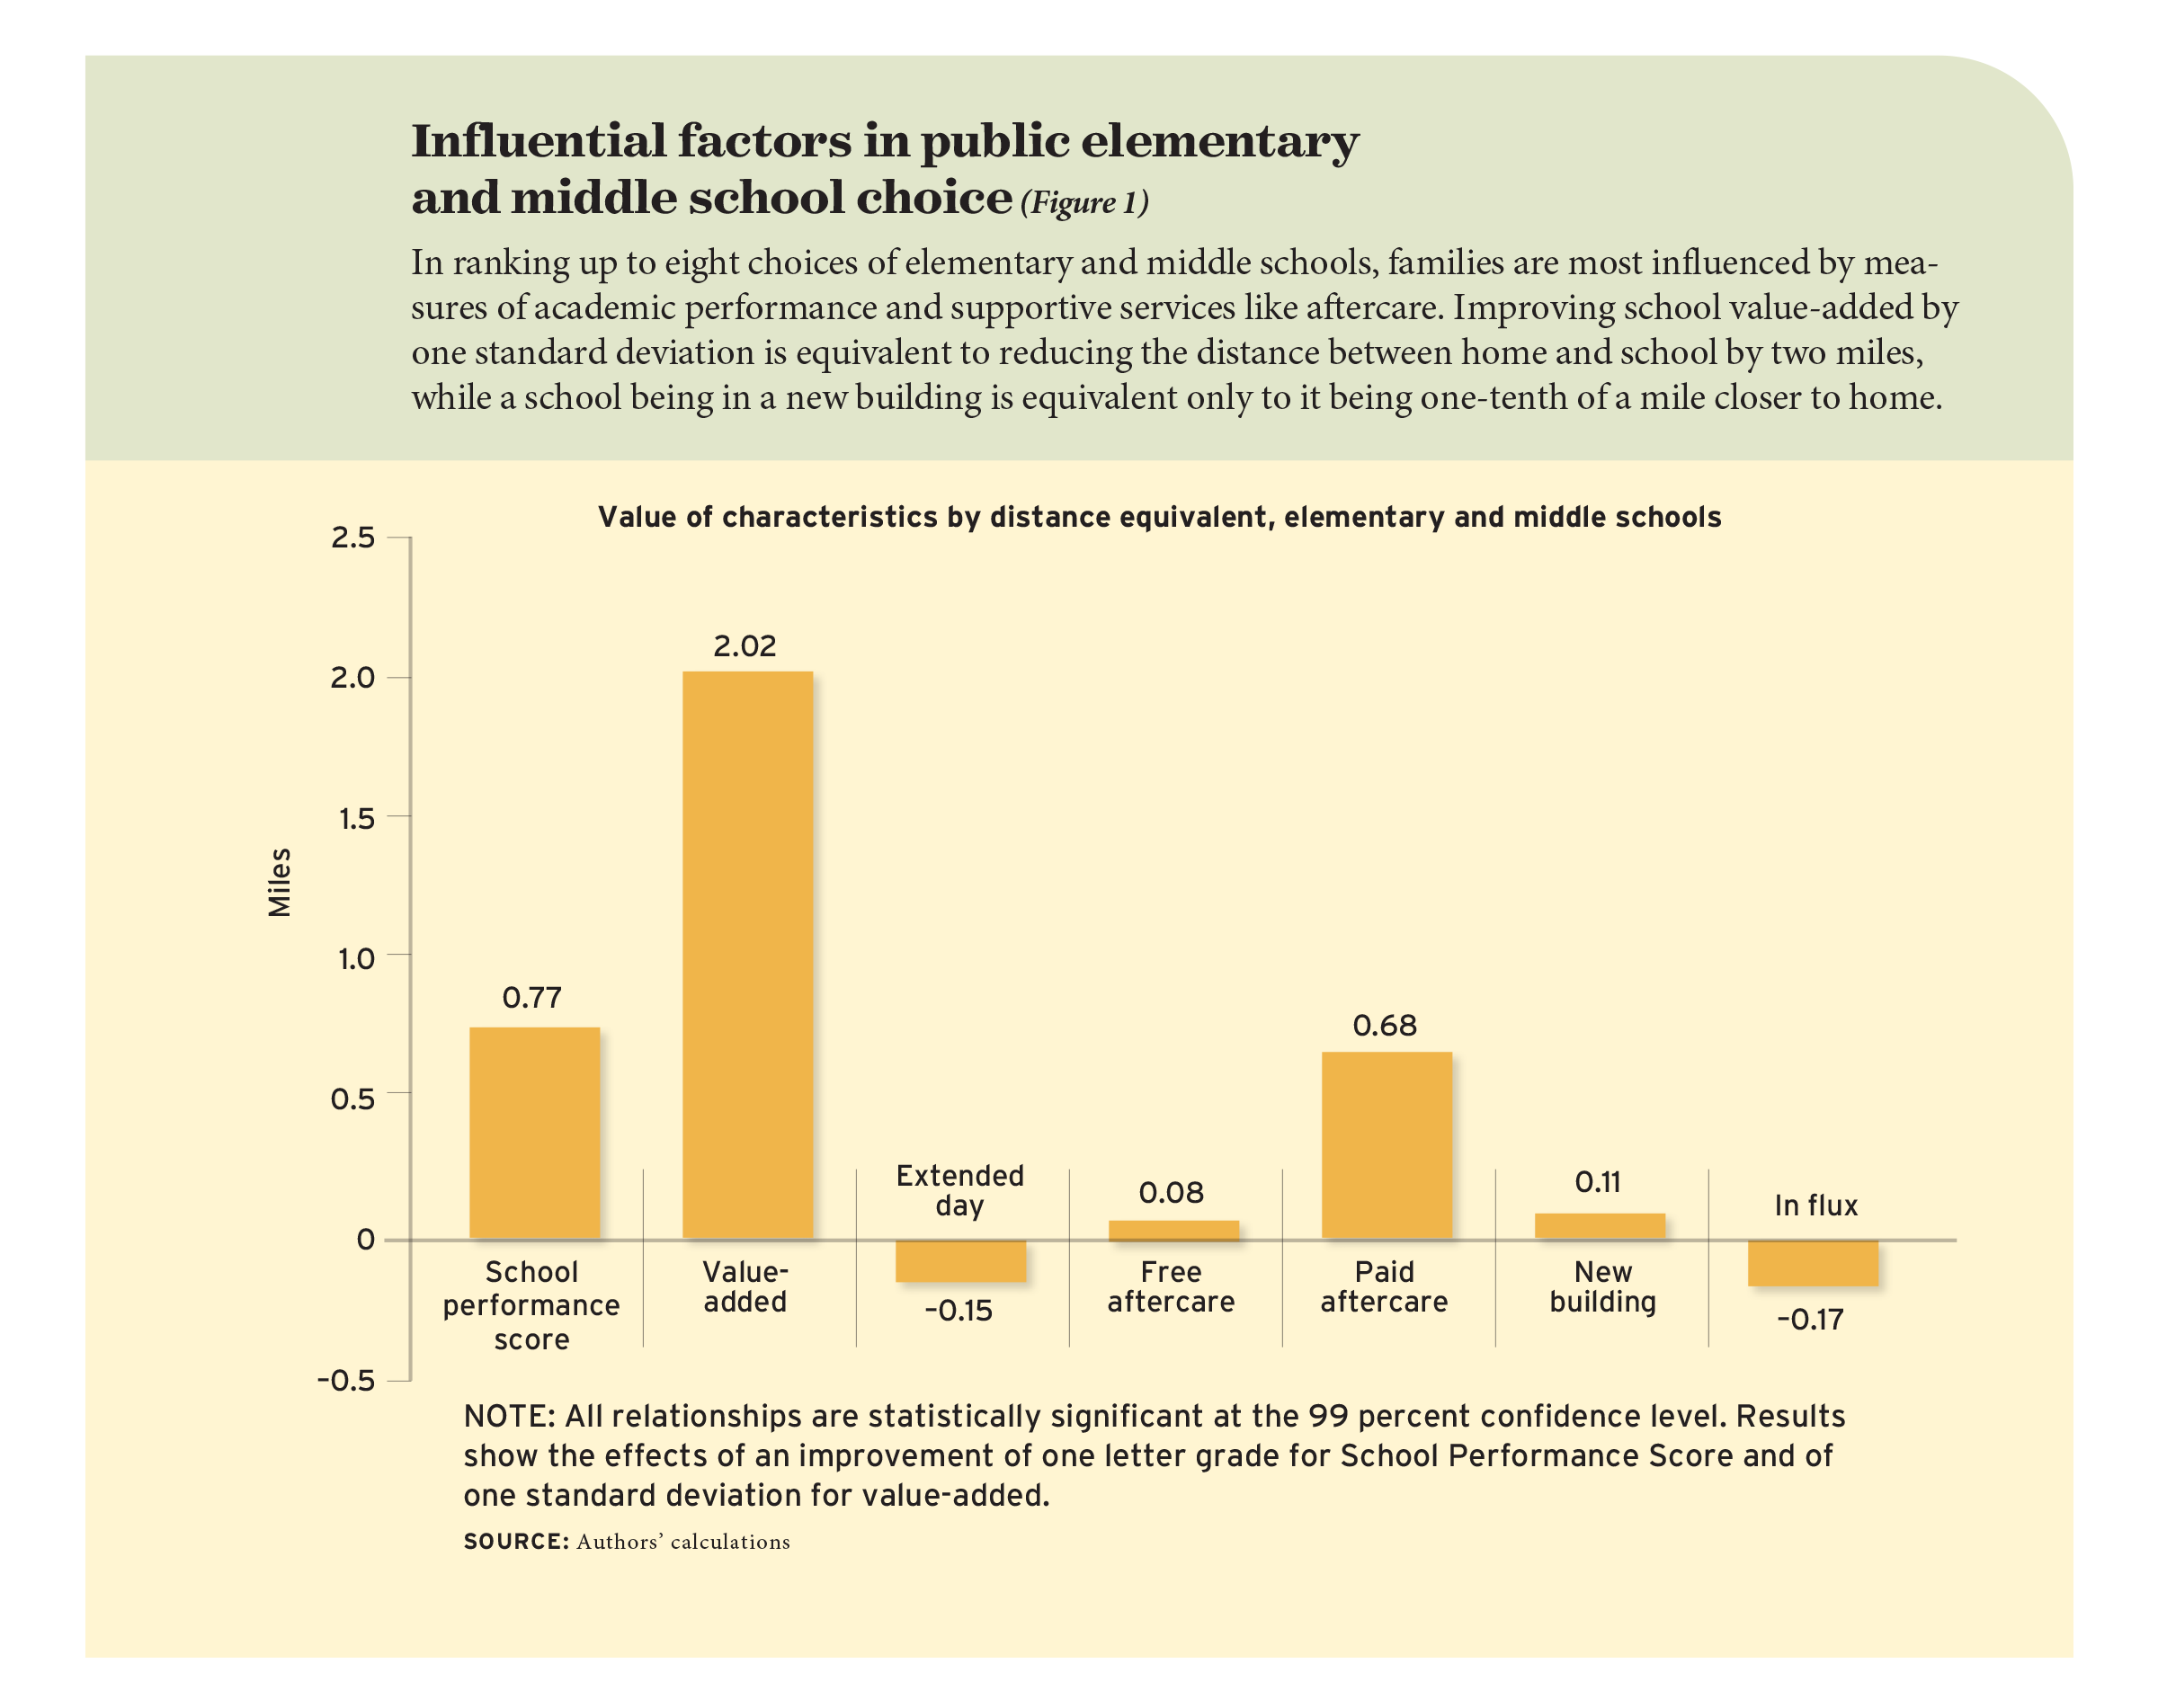 Figure 1: Influential factors in public elementary and middle school choice